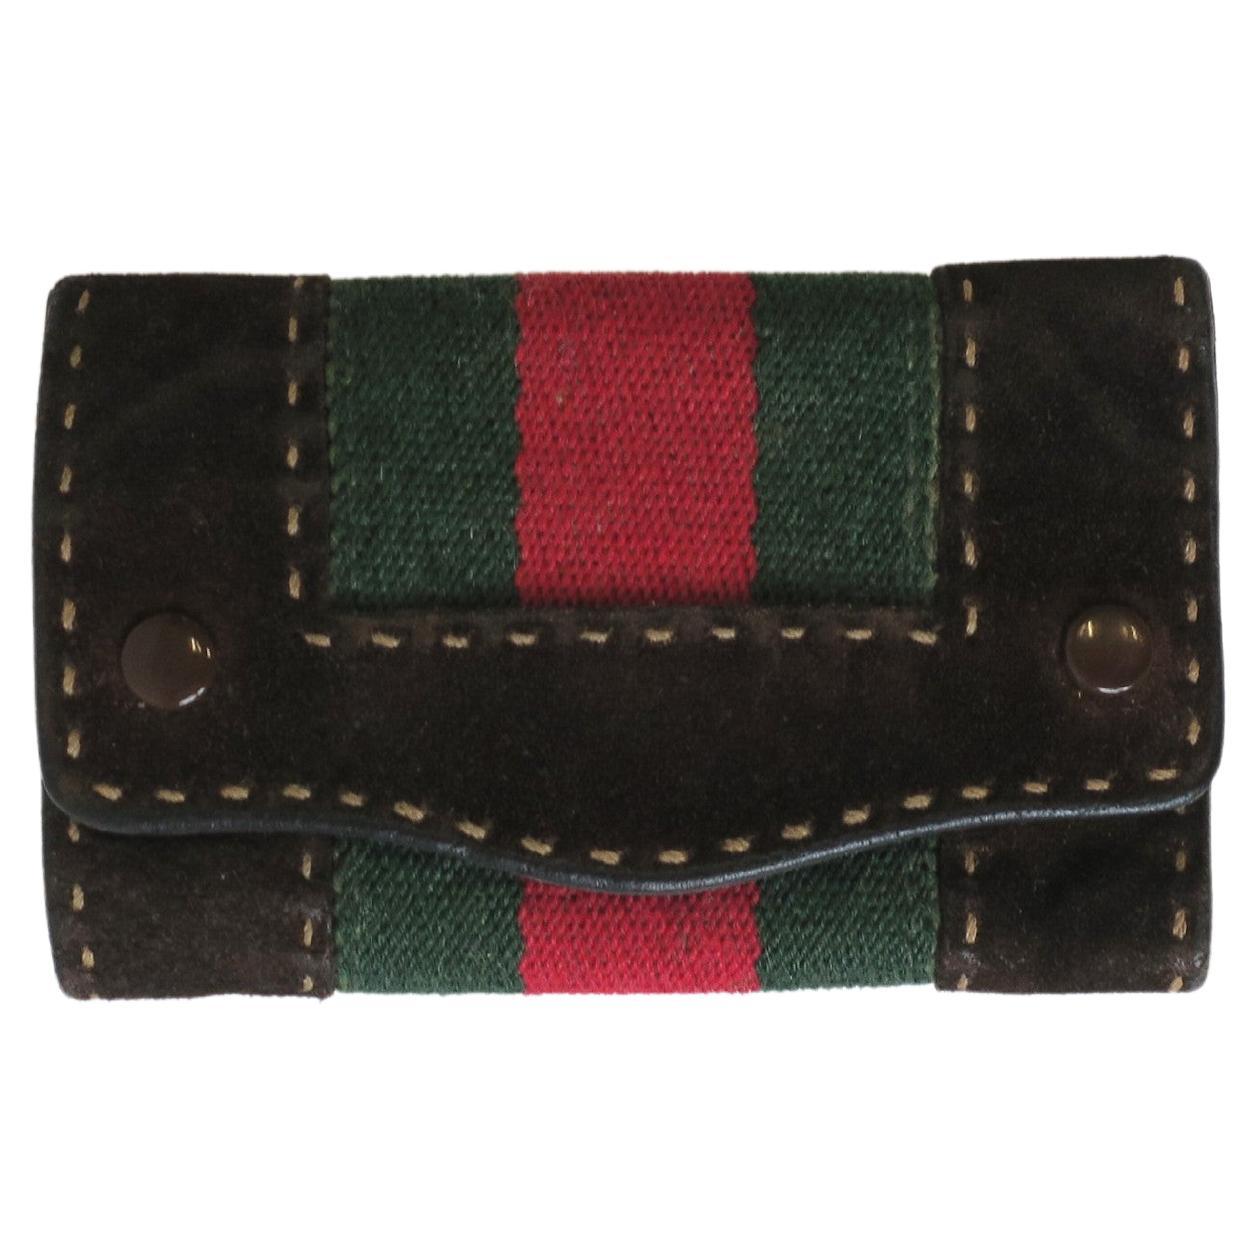 Gucci Keychain Holder Case in Suede and Leather